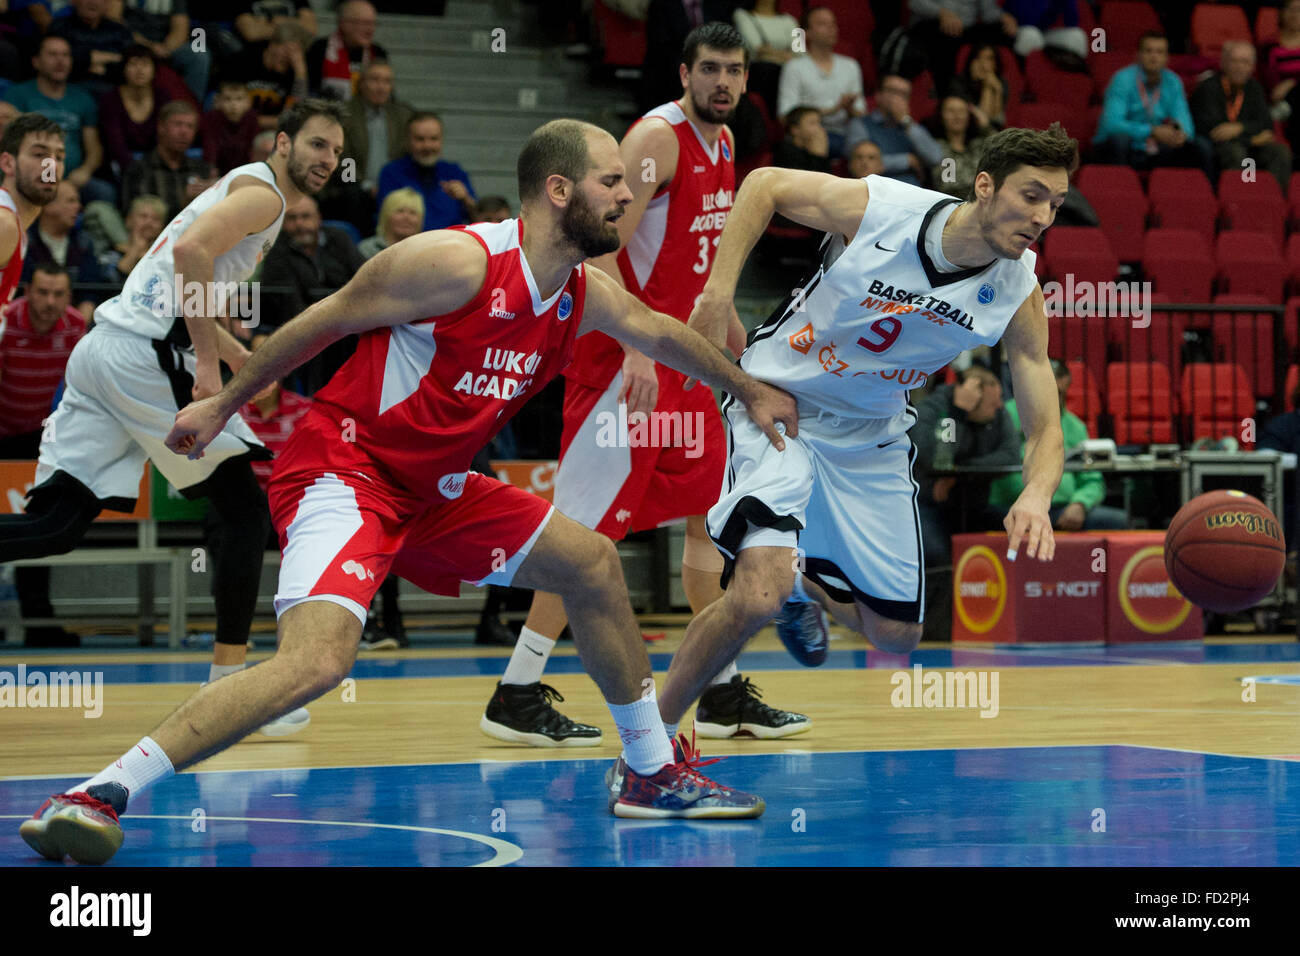 Zeljko Sakic of Sofia, left, and Jiri Welsch of Nymburk in action during the Men FIBA Europe Cup, 5th round, Group P, match CEZ Basketbal Nymburk vs Academic Sofia, in Nymburk, Czech Republic, on Wednesday, January 27, 2016. (CTK Photo/Michal Kamaryt) Stock Photo